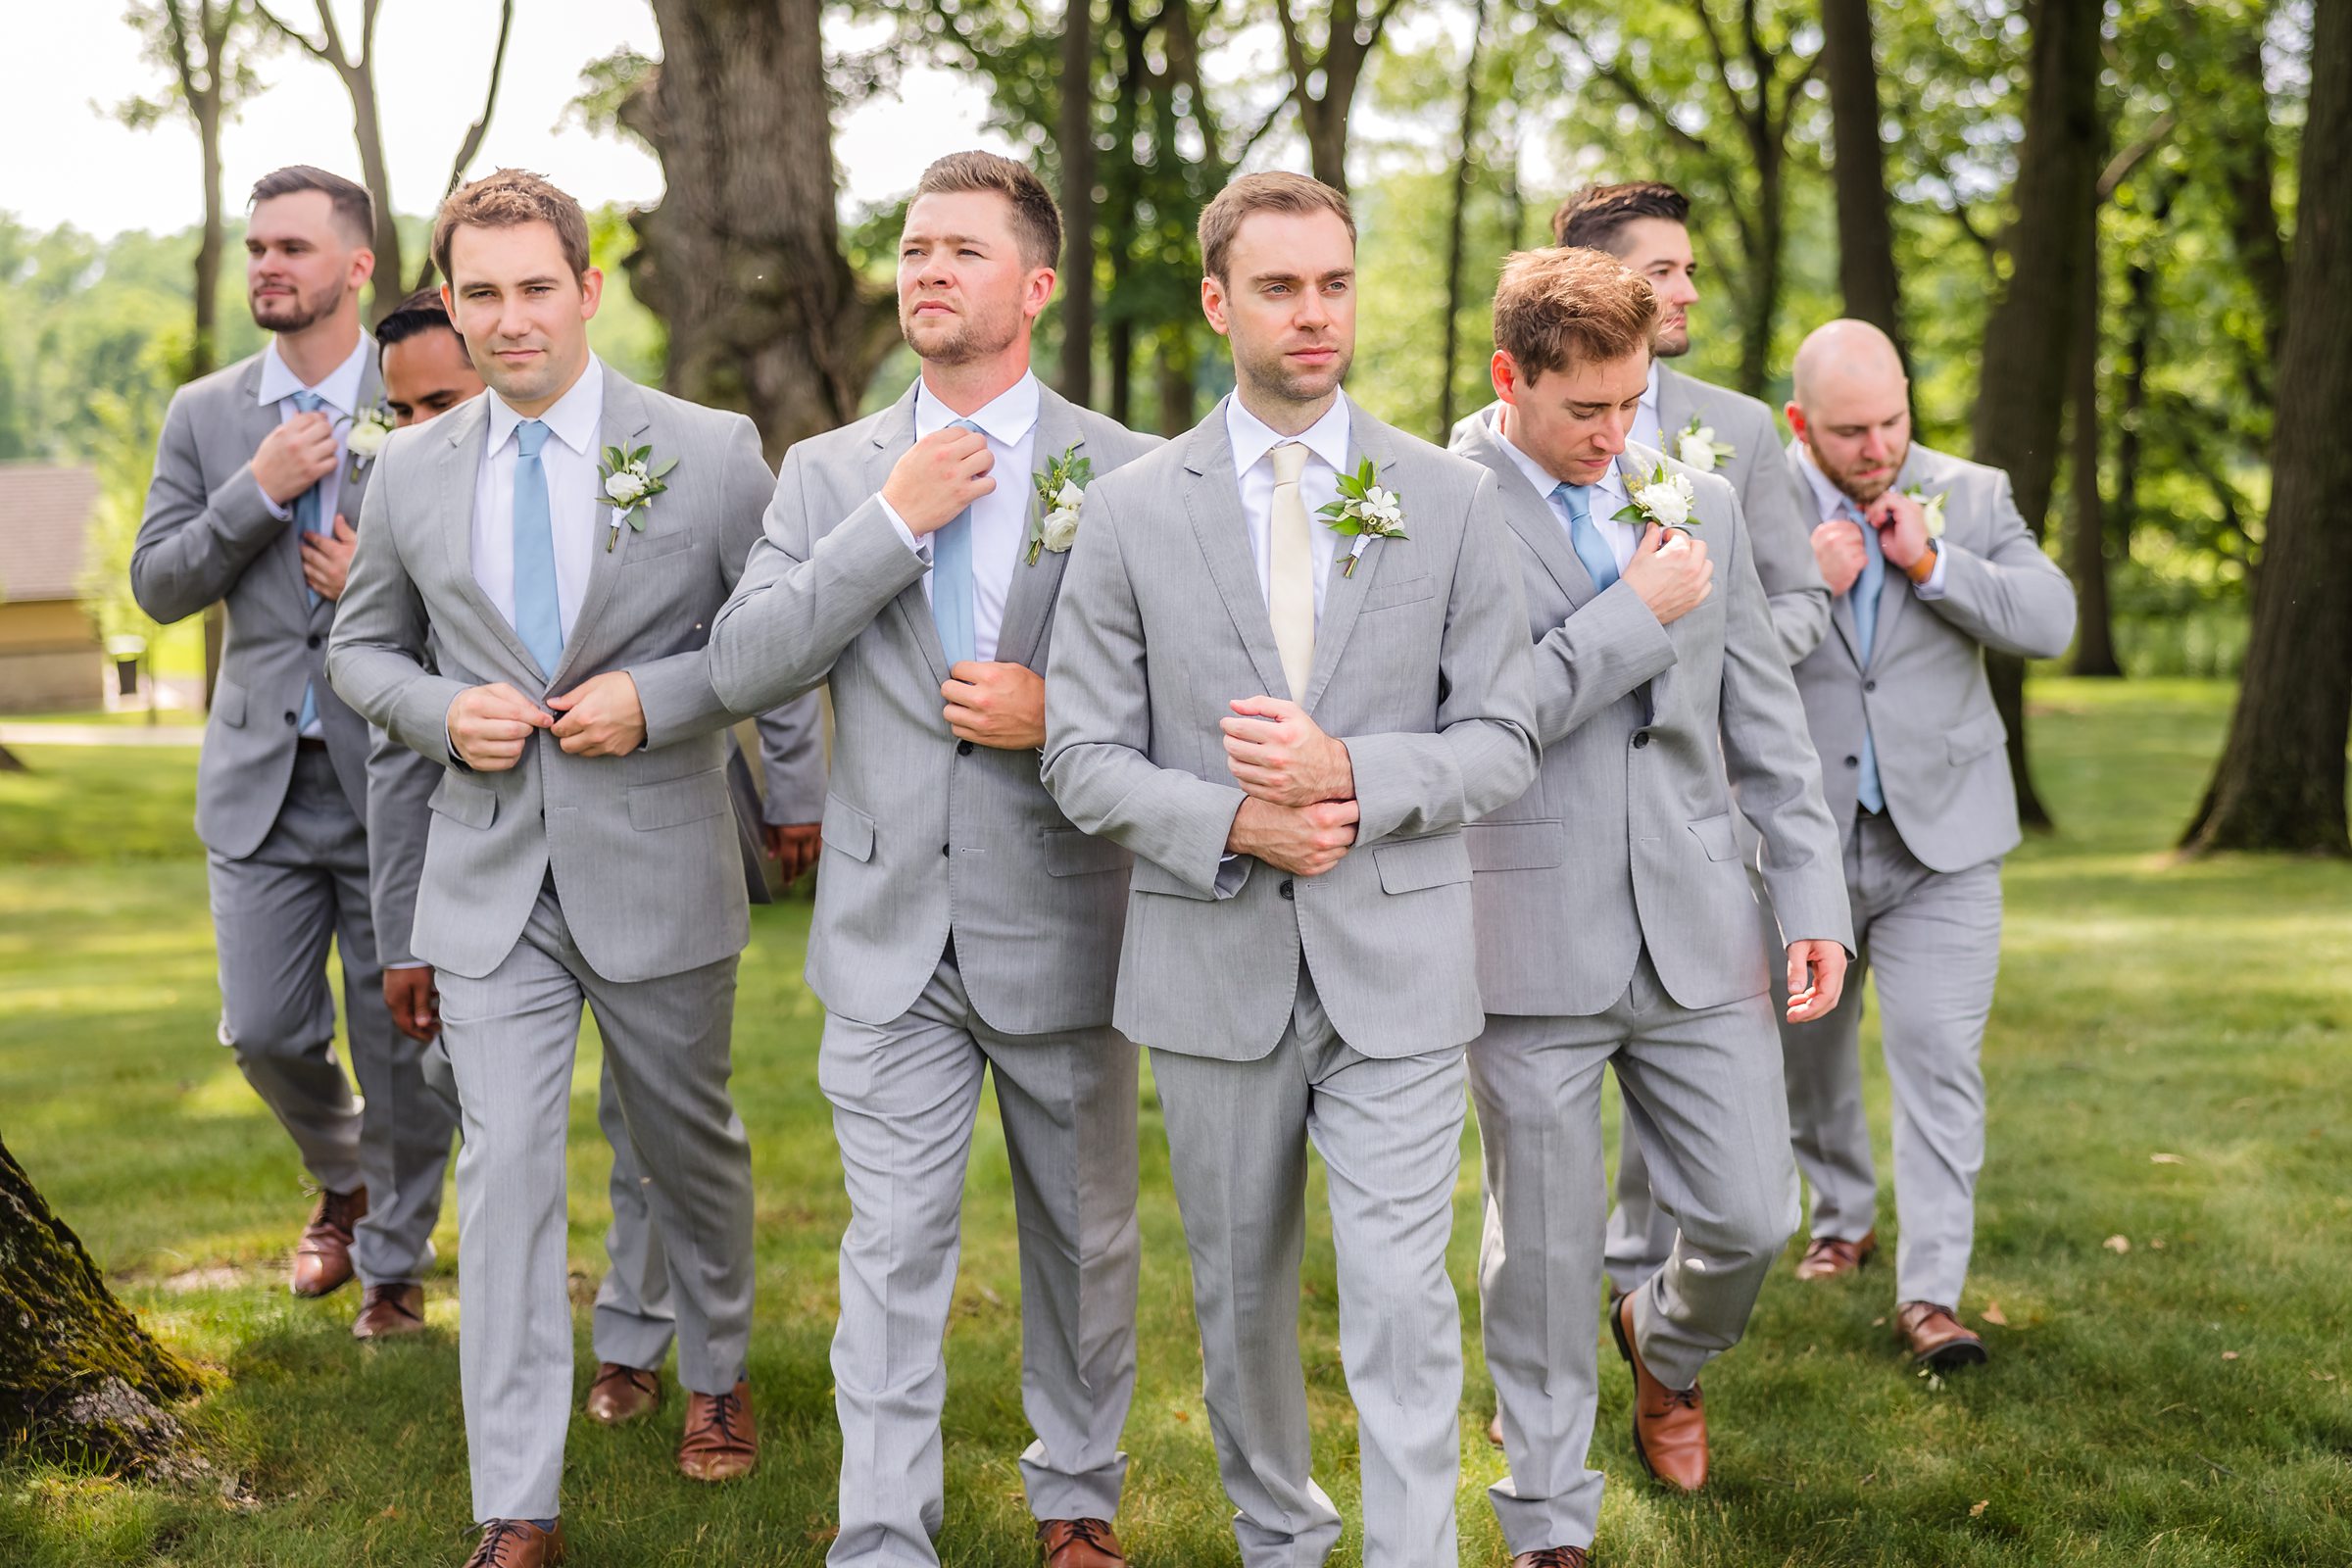 Groom with Groomsmen during a wedding at the Monte Bello Estate in Lemont, Illinois.